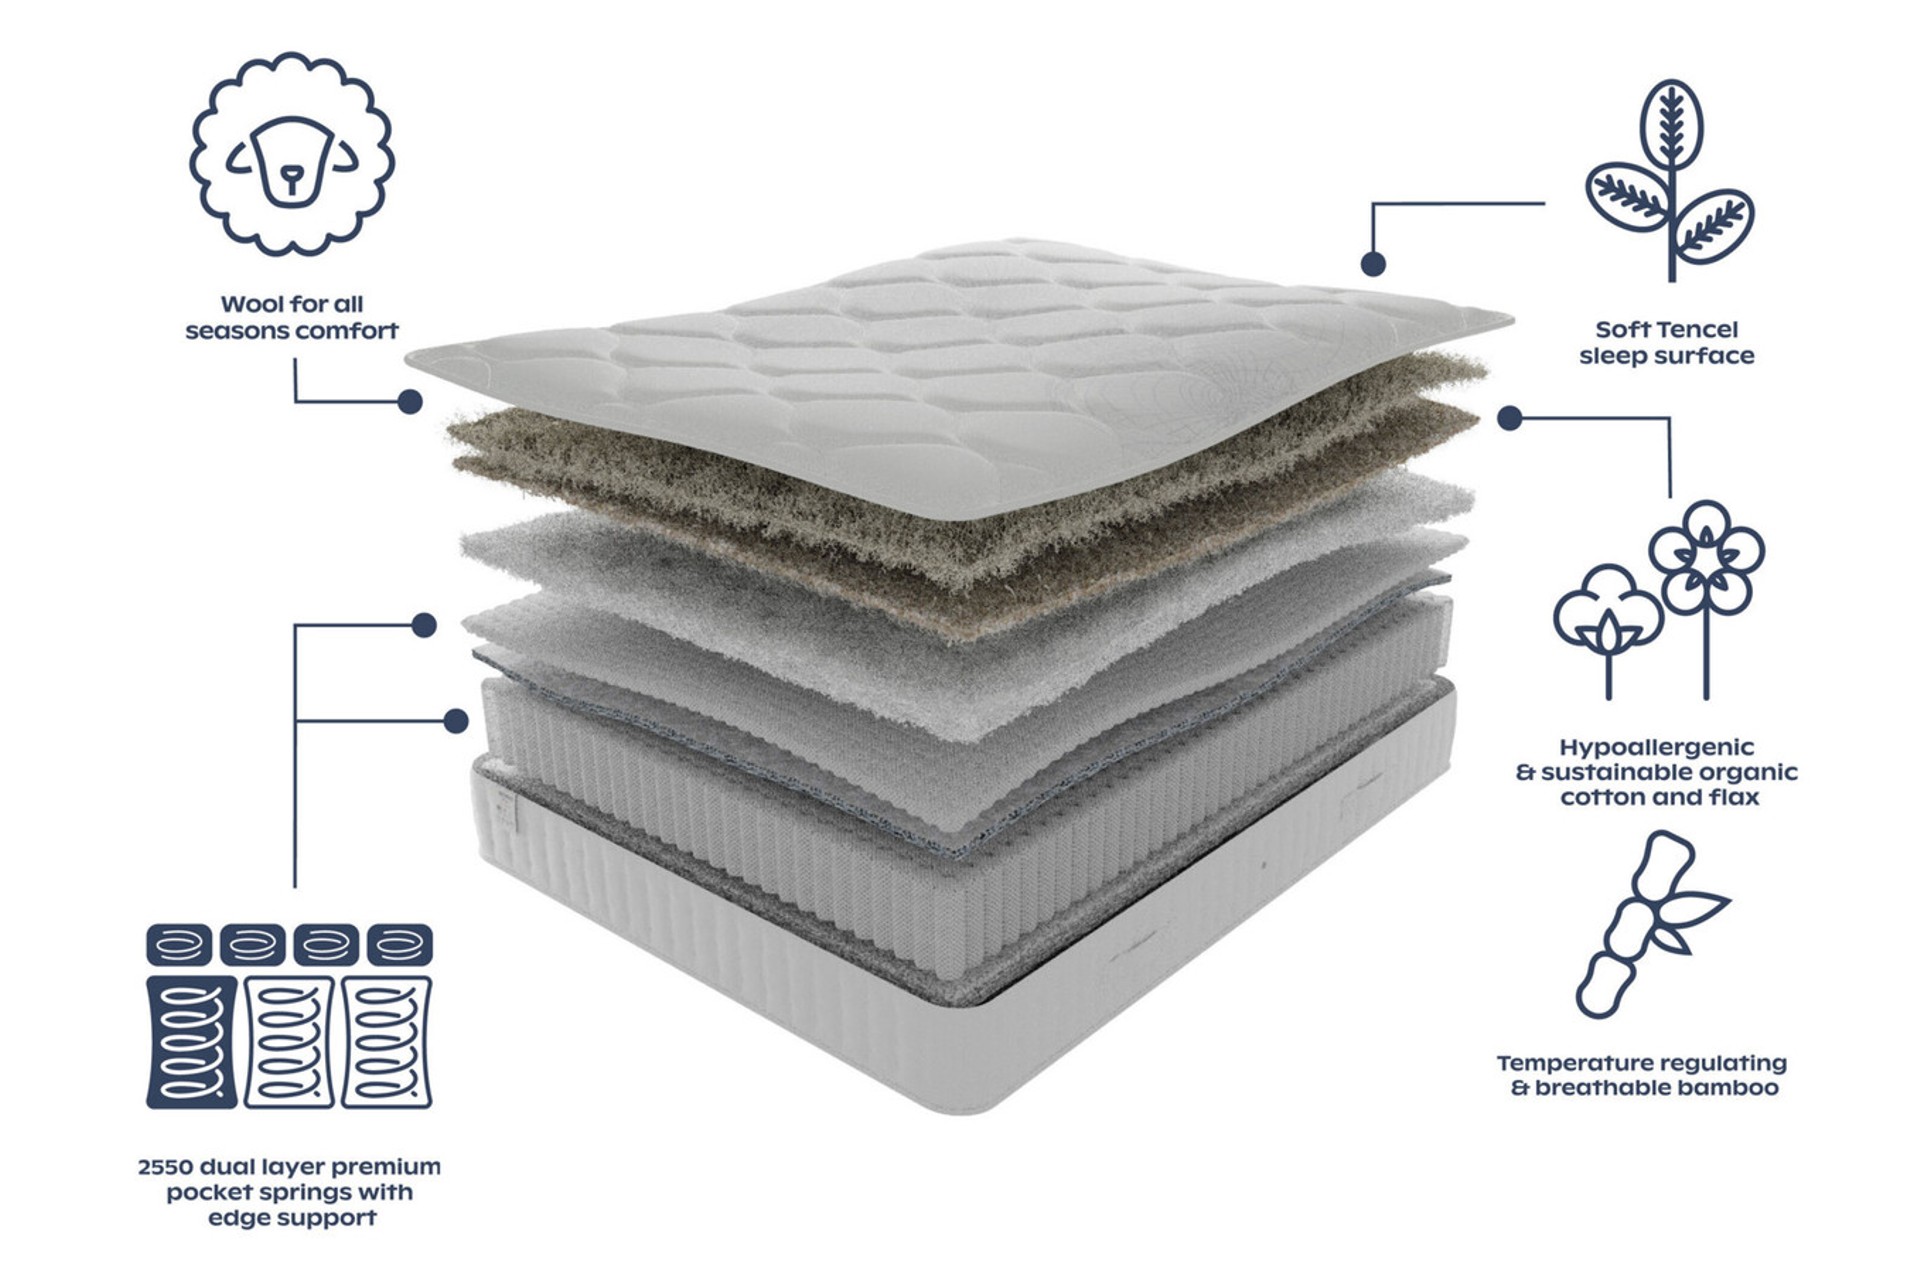 A visual breakdown of the materials used in making the premium wool mattress